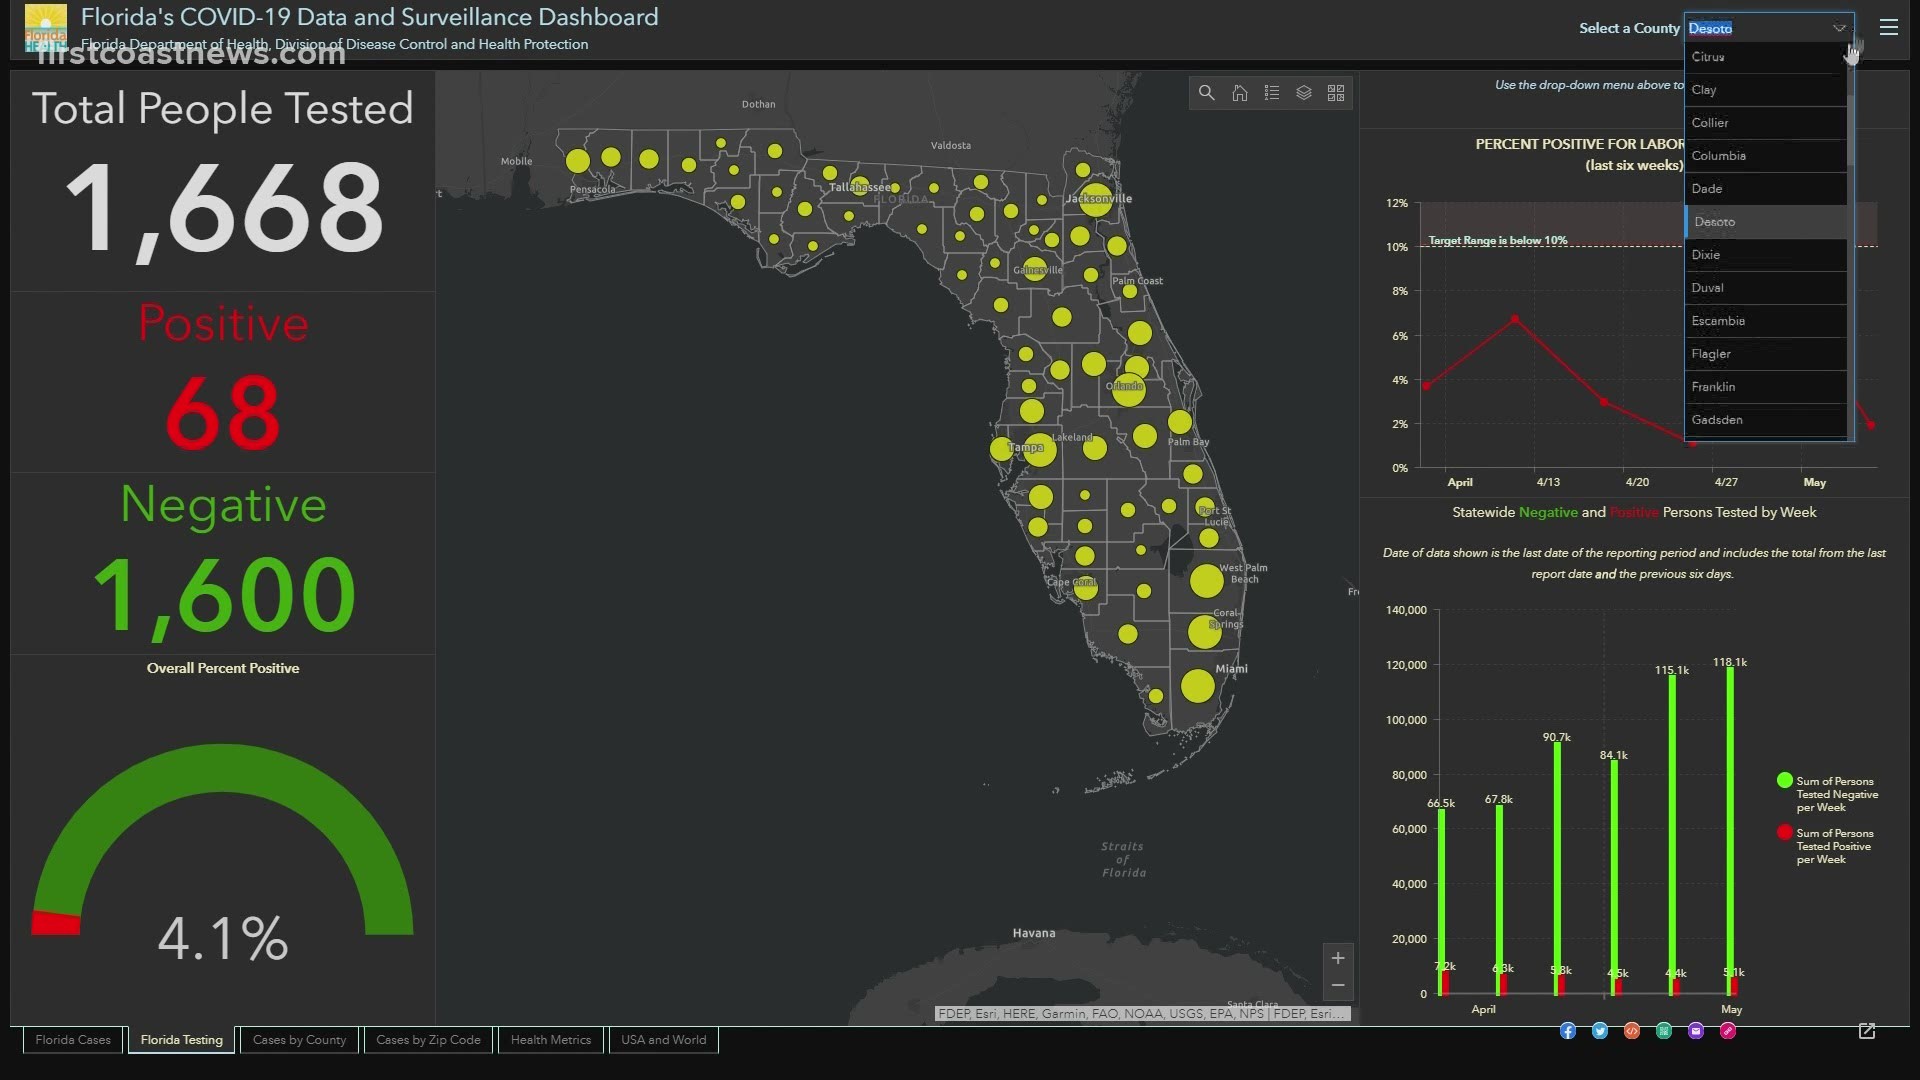 The database is relied on by thousands of Floridians to display accurate county-by-county COVID-19 testing data and provide a baseline for tracking the curve.